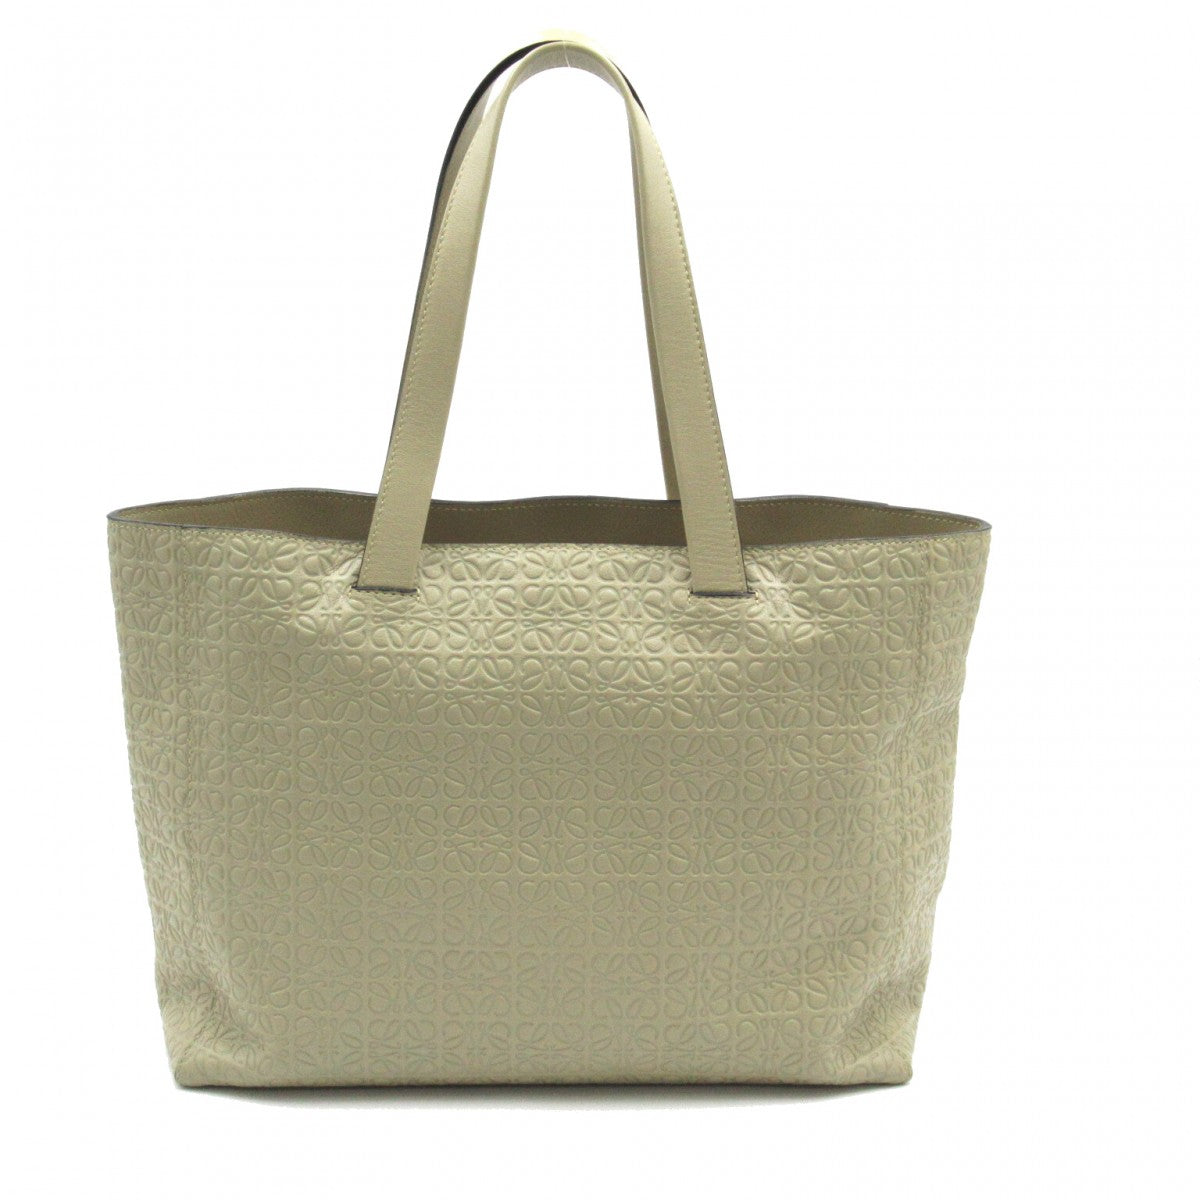 Anagram Embossed Leather Shopper Tote